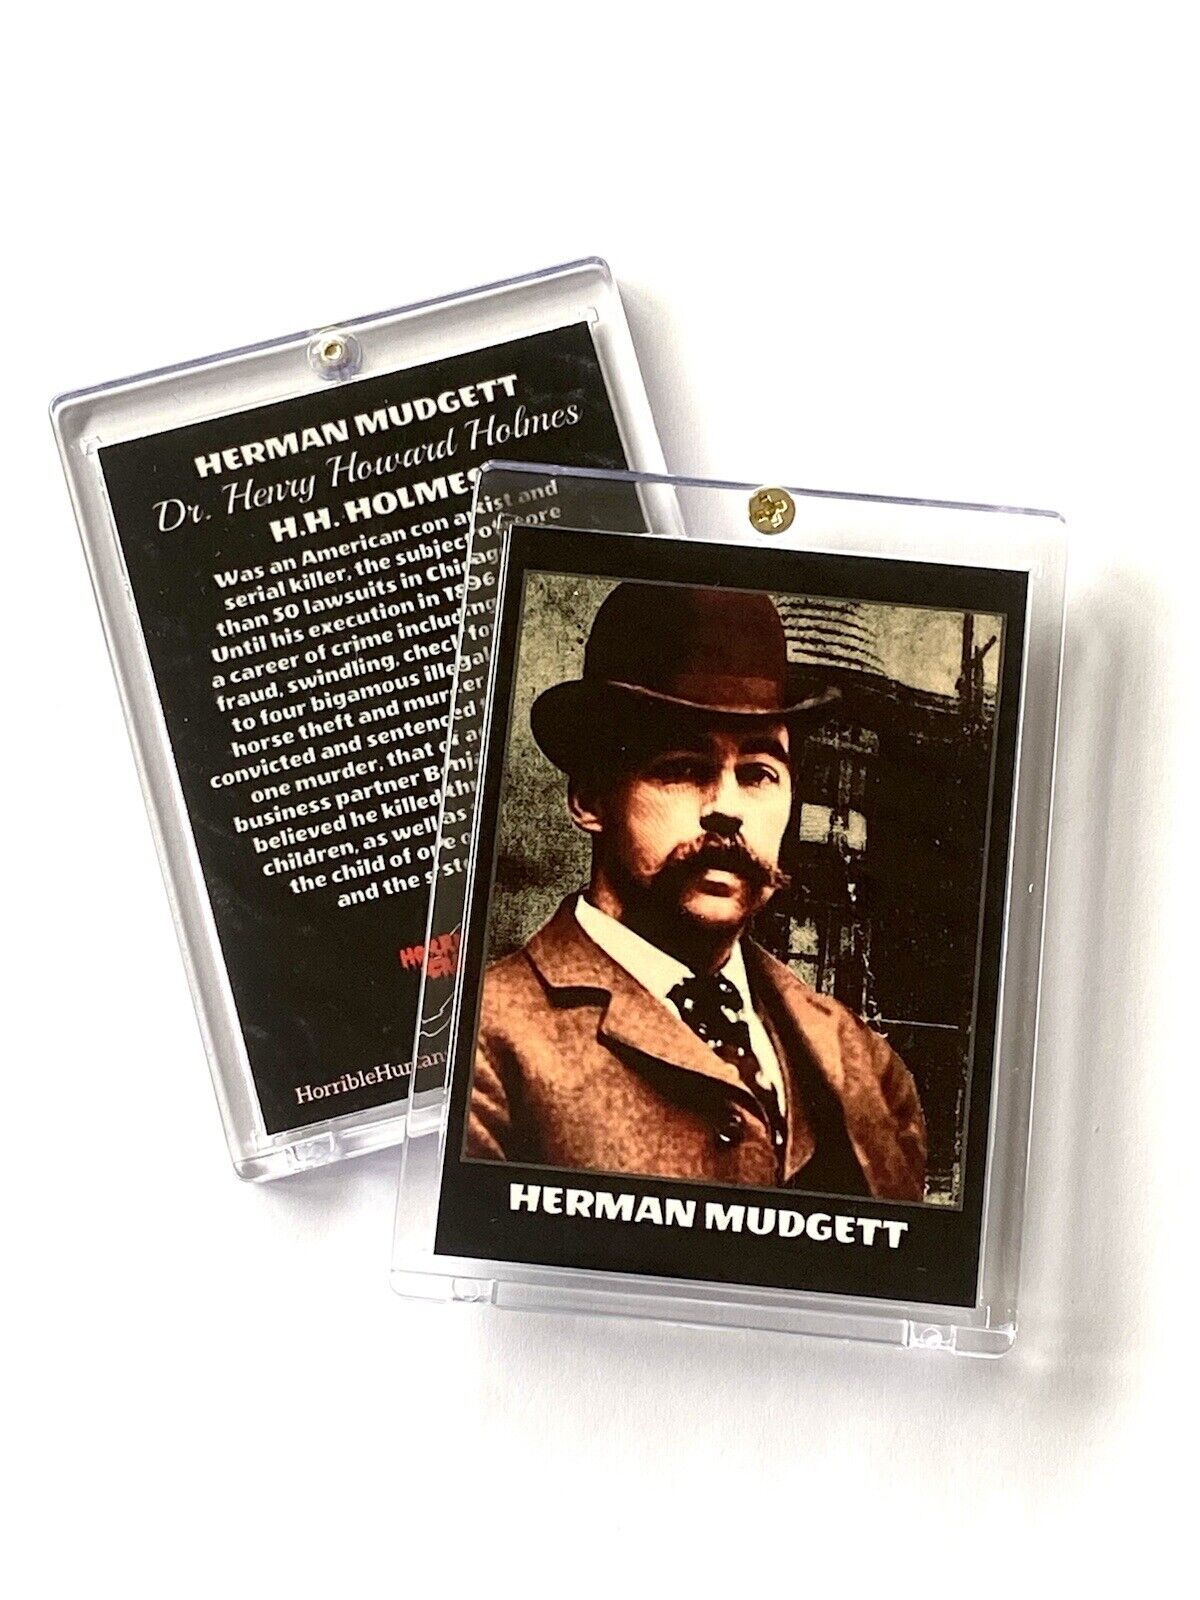 H.H. HOLMES “DR HENRY HOWARD” Herman Mudgett Card In Protective Case